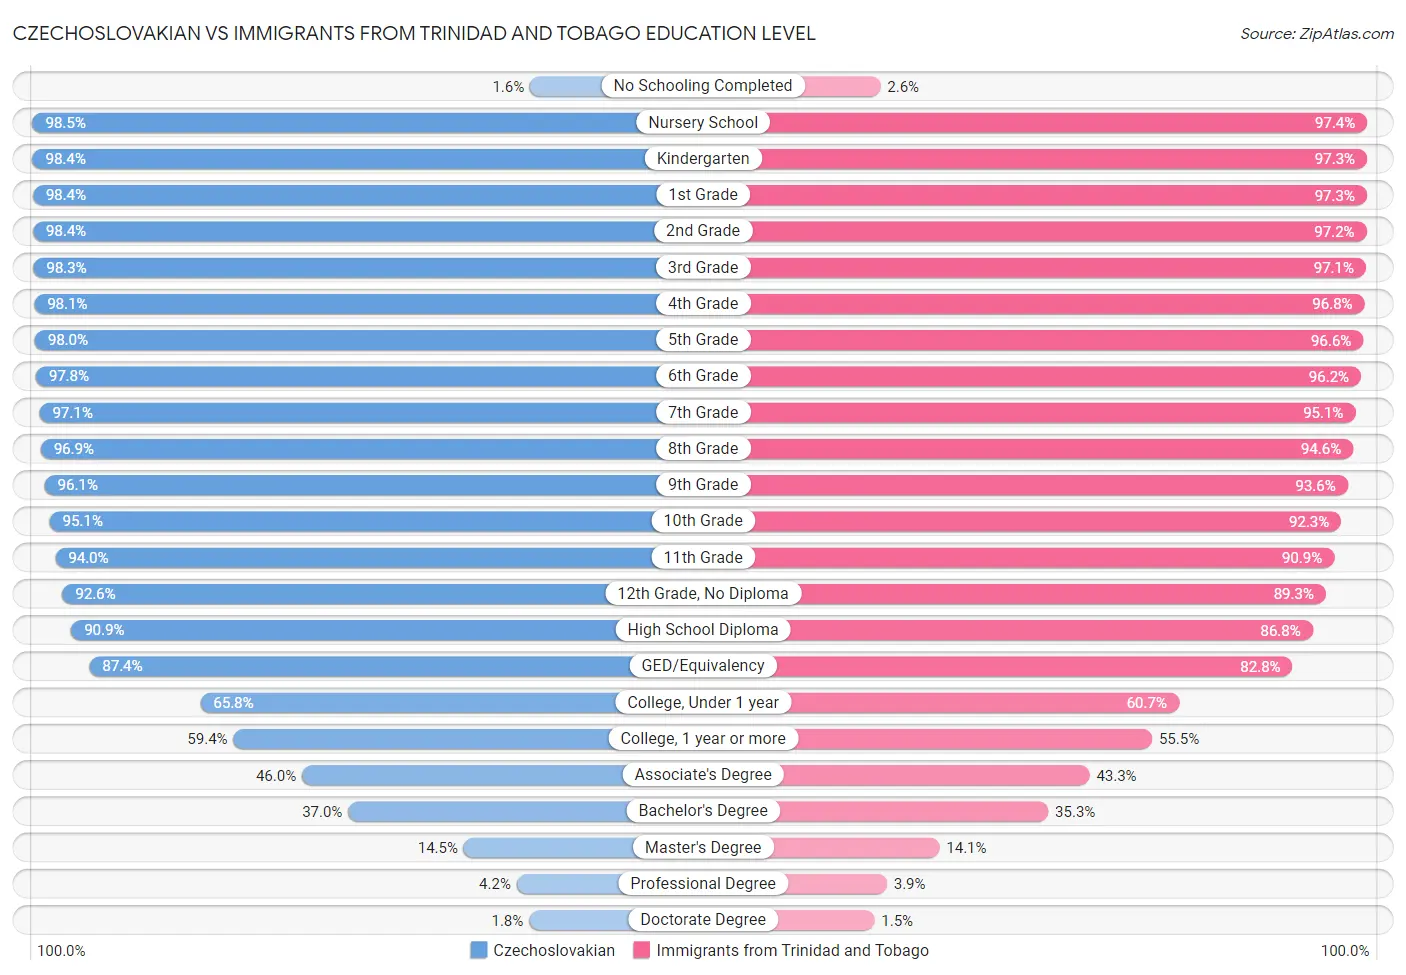 Czechoslovakian vs Immigrants from Trinidad and Tobago Education Level